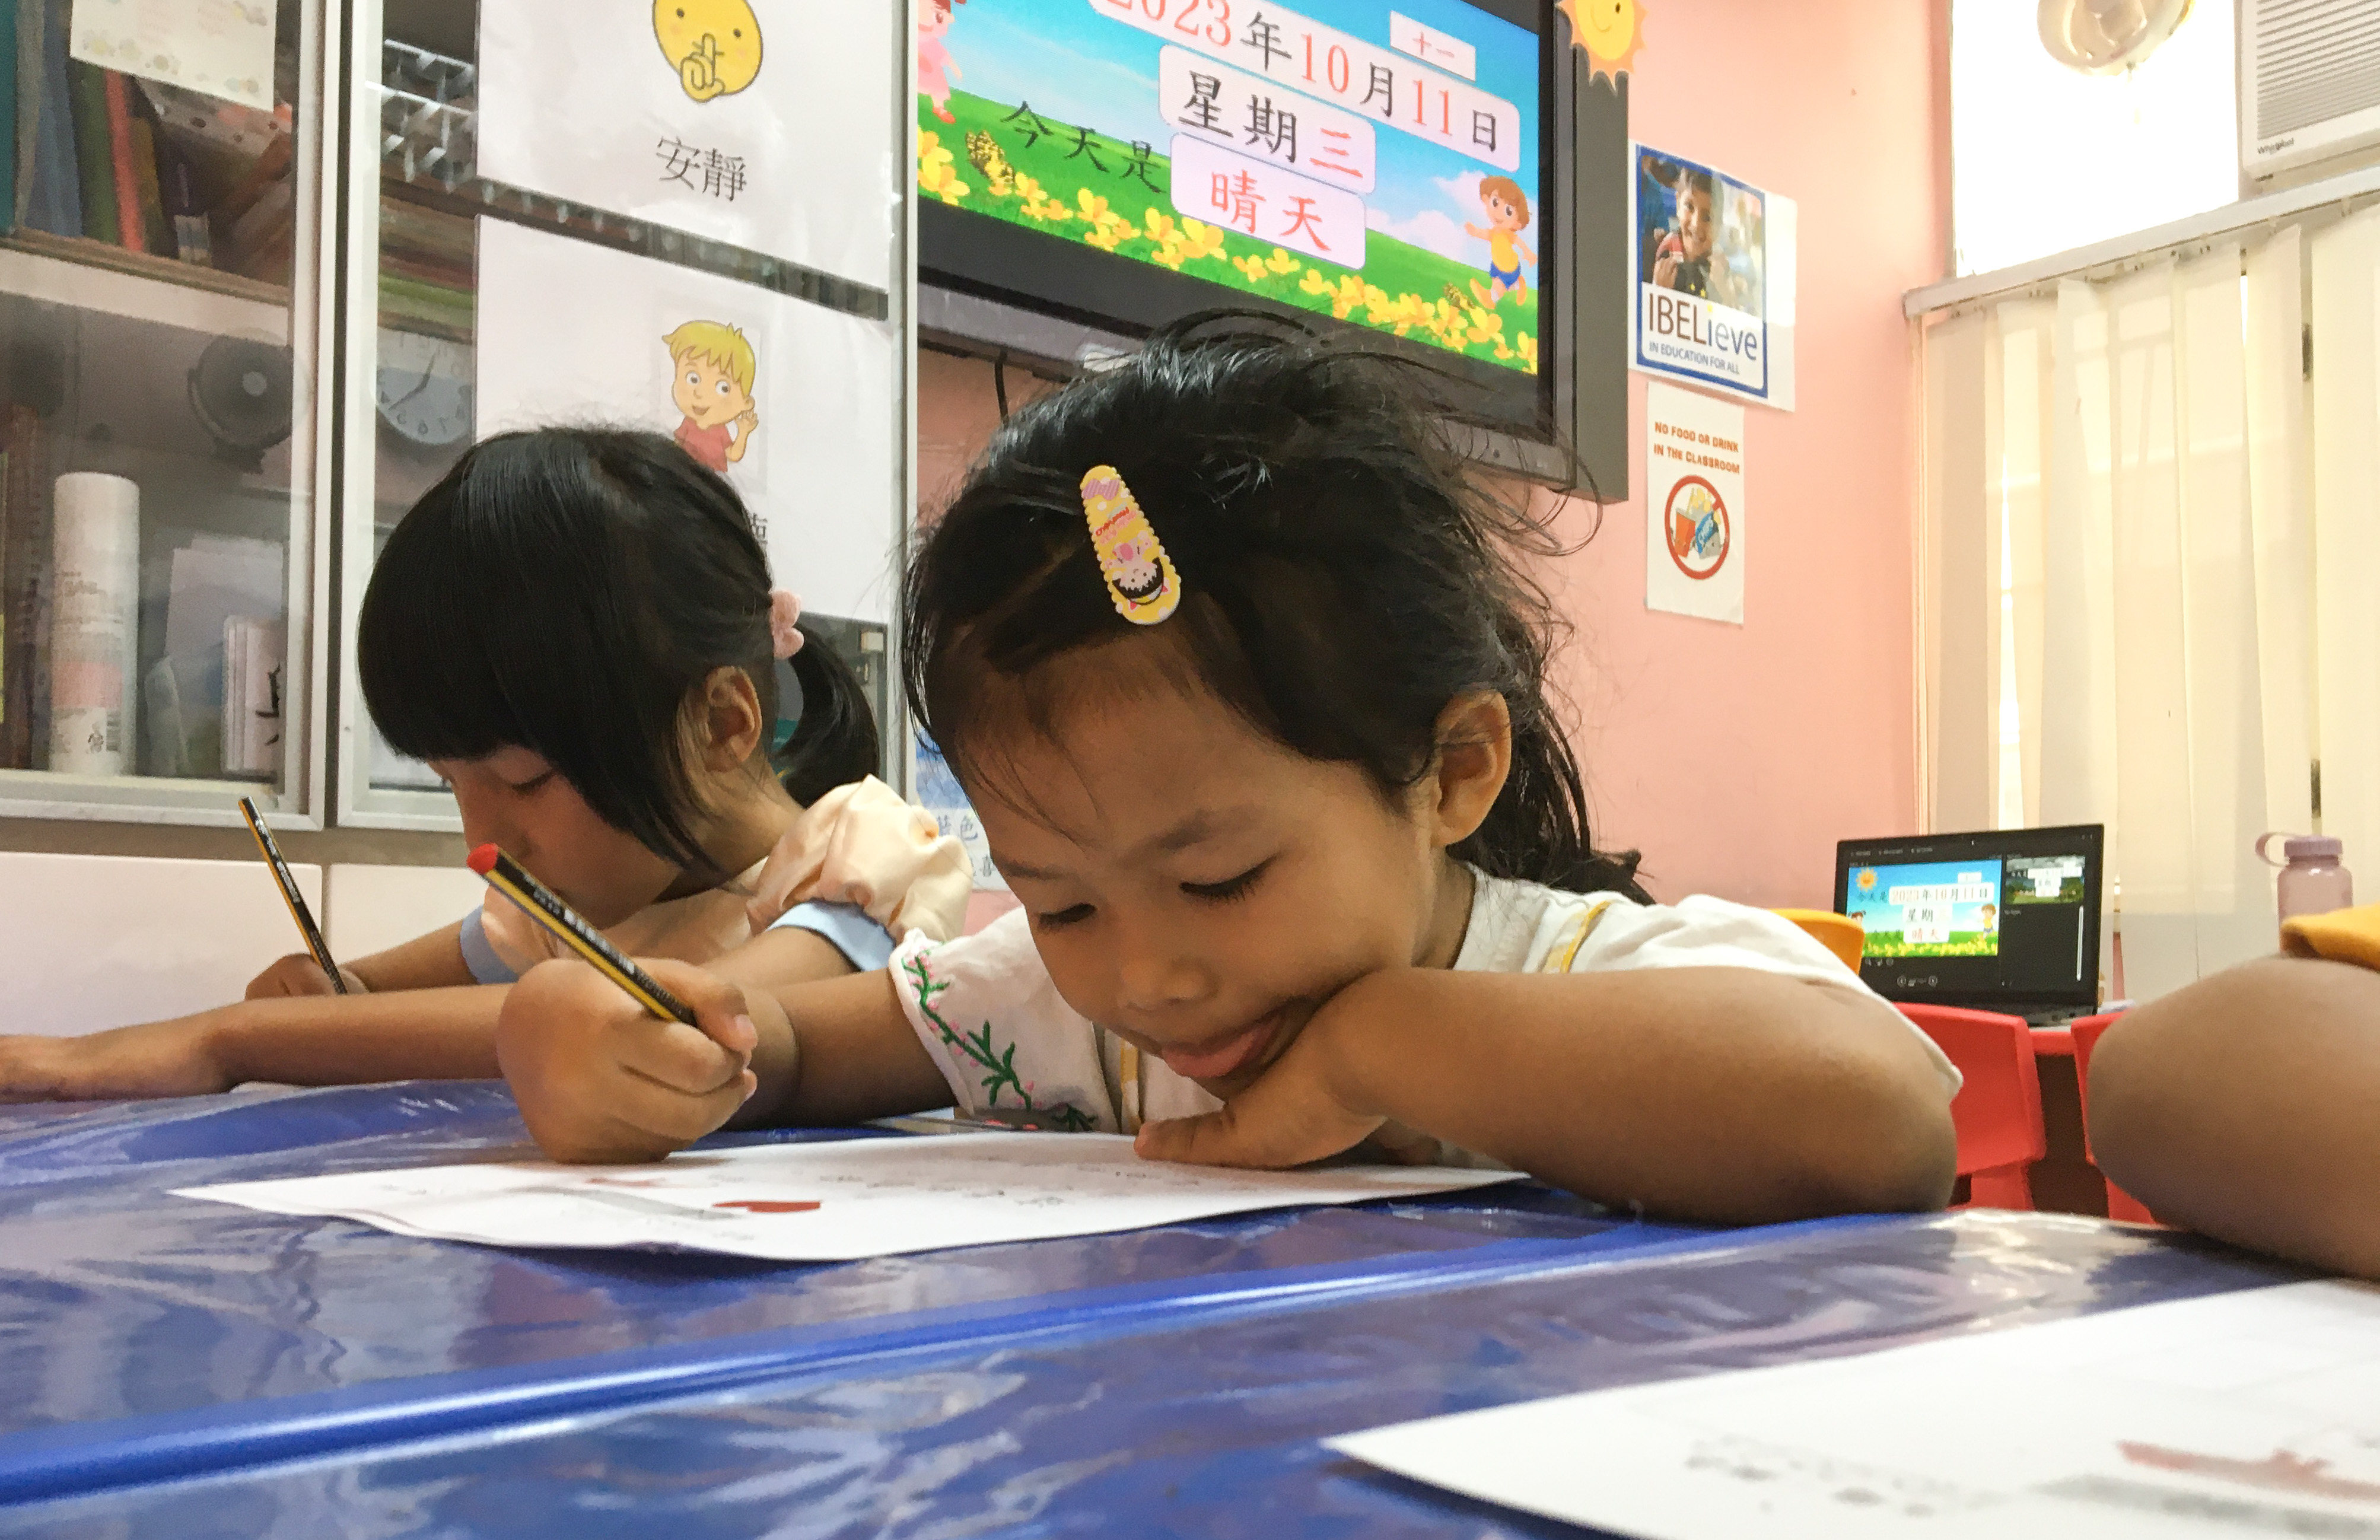 IBEL-run centers offer affordable Chinese-language tuition to underprivileged ethnic minority children. Photo: Cindy Sui